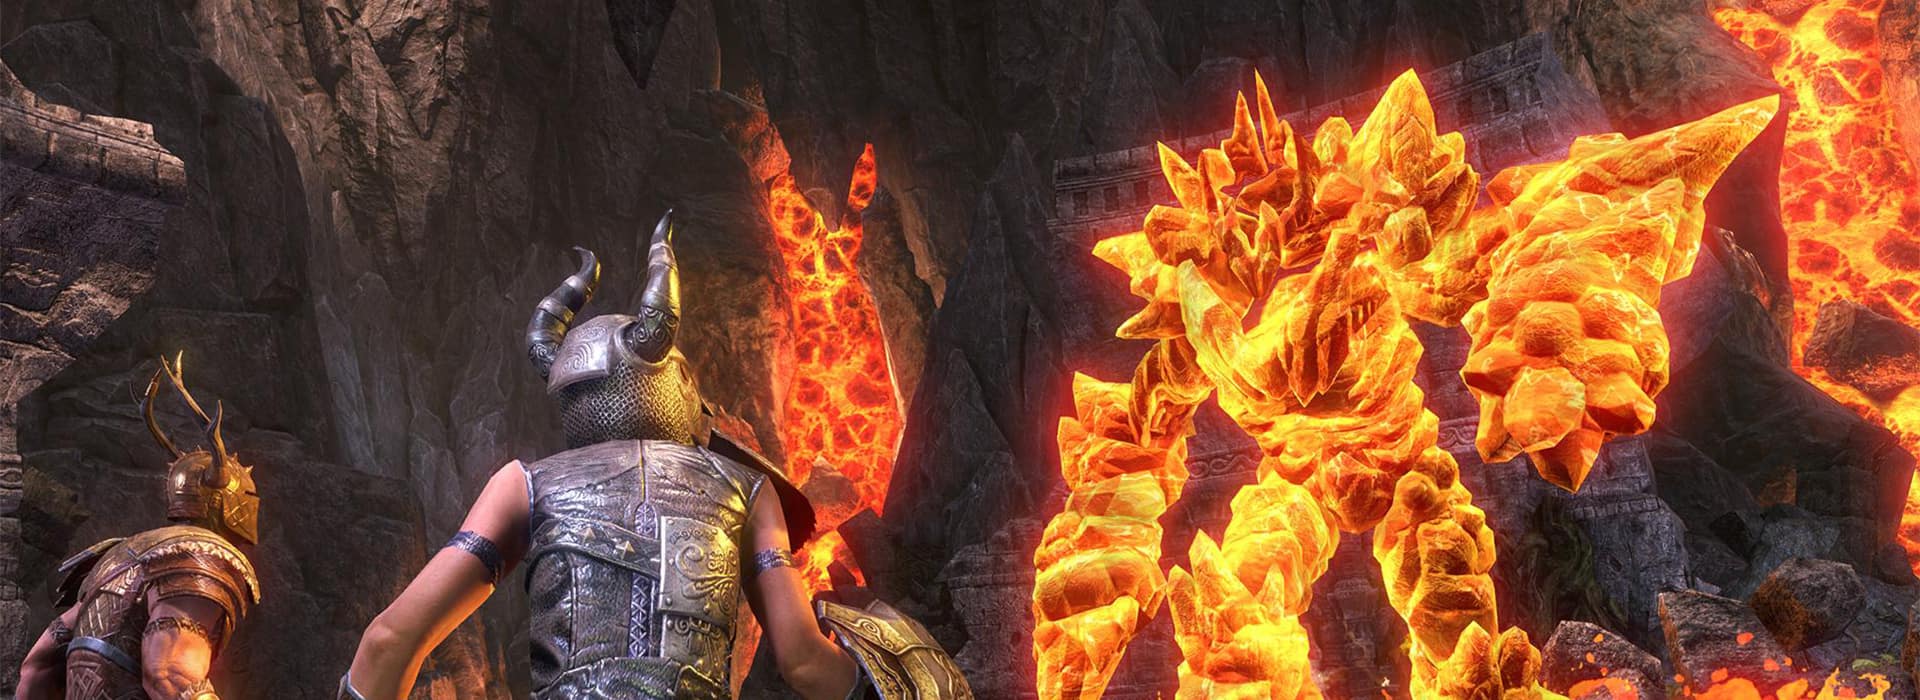 The Elder Scrolls Online Horns Of The Reach Release Date and Details